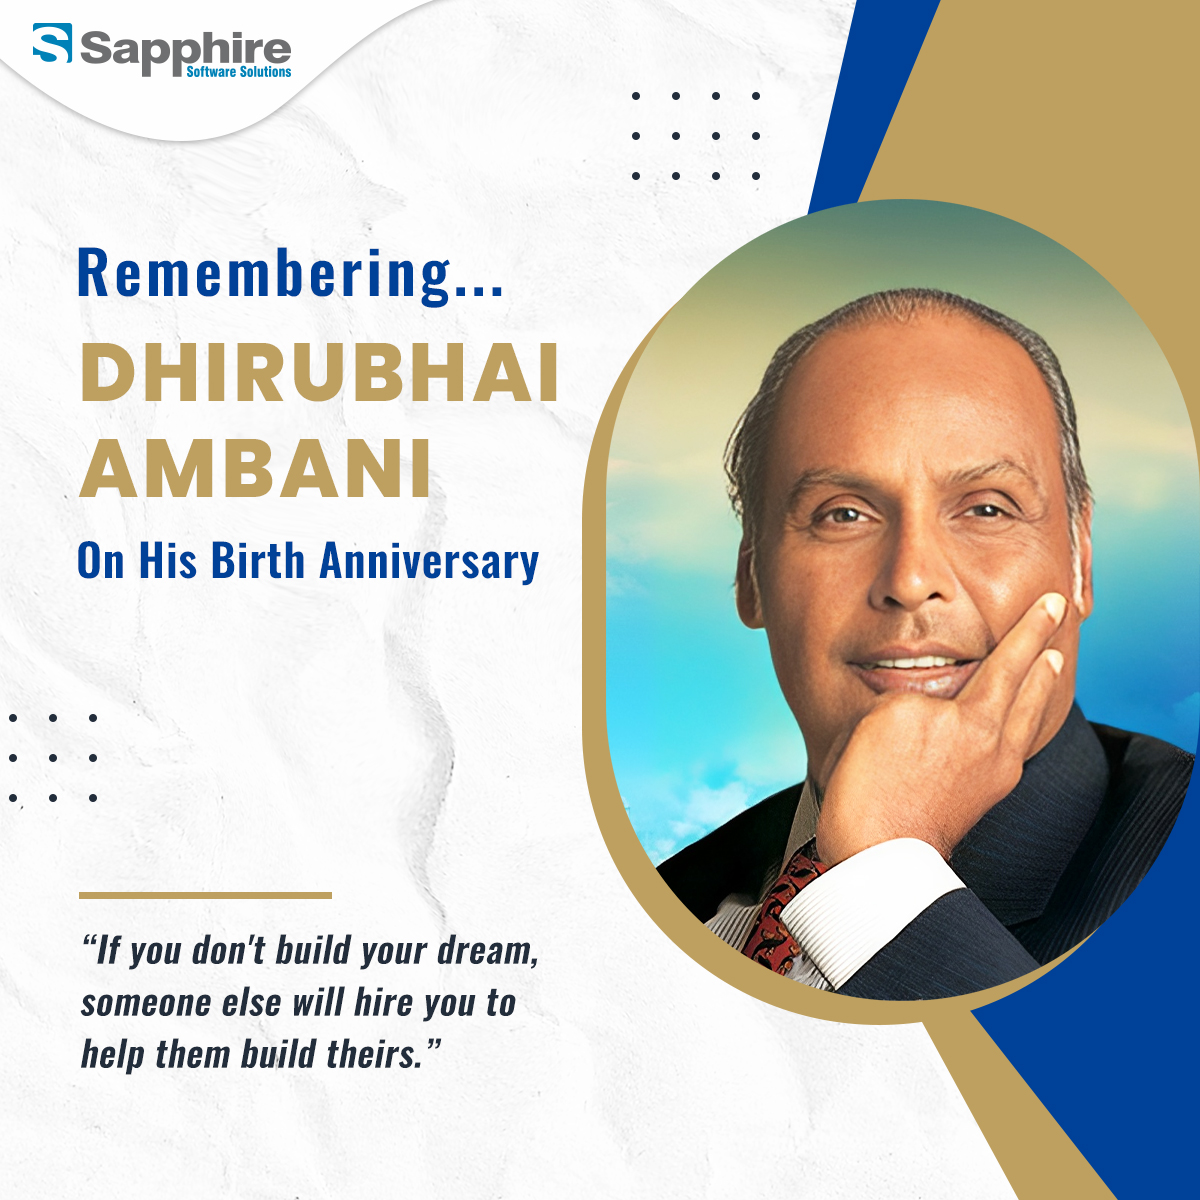 Remembering Dhirubhai Ambani On His Birth Anniversary..!!

“If you don't build your dream, someone else will hire you to help them build theirs.”

#DhirubhaiAmbani #AmbaniBirthAnniversary #FounderOfReliance #IndianBusinessIcon #RememberingDhirubhai #AmbaniLegacy